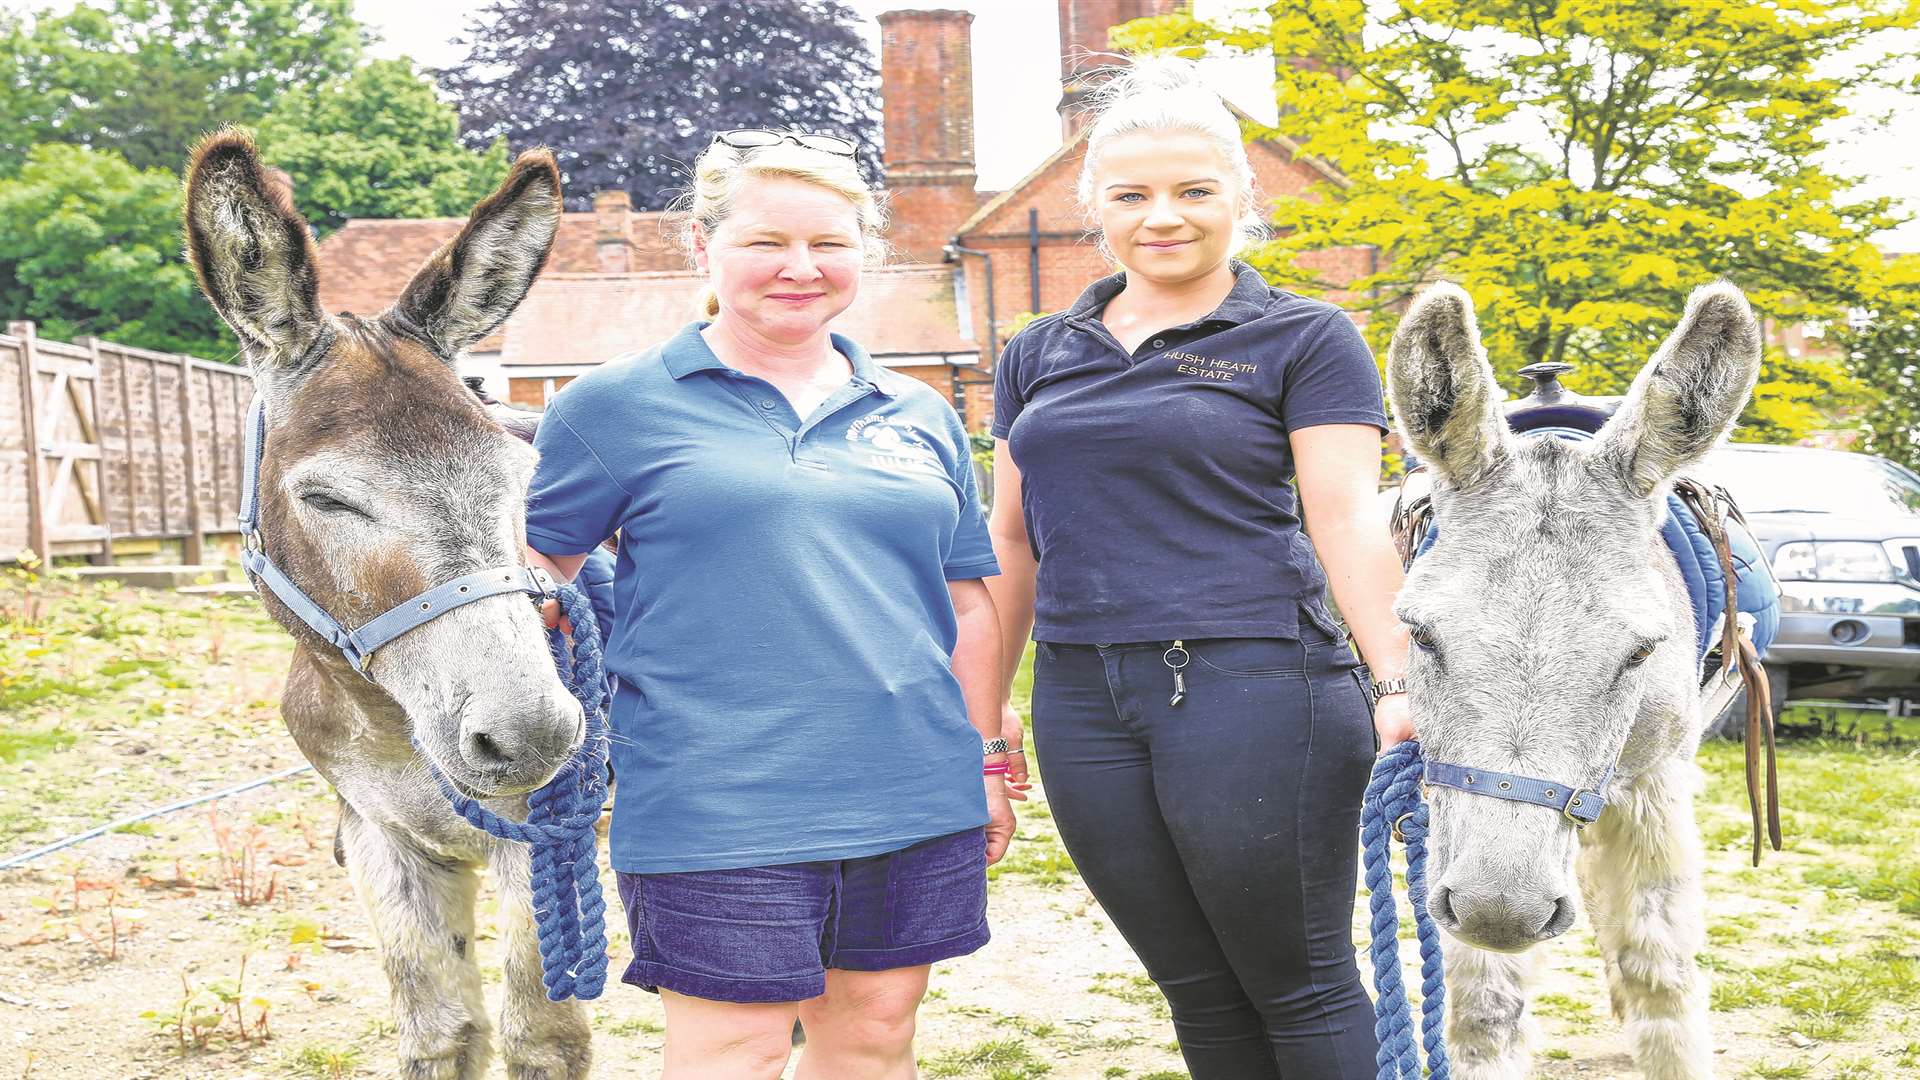 Julie Wilding and Lauren Cansick with Smokey and Bandot the donkeys at the Tickled Trout. Picture by: Matthew Walker